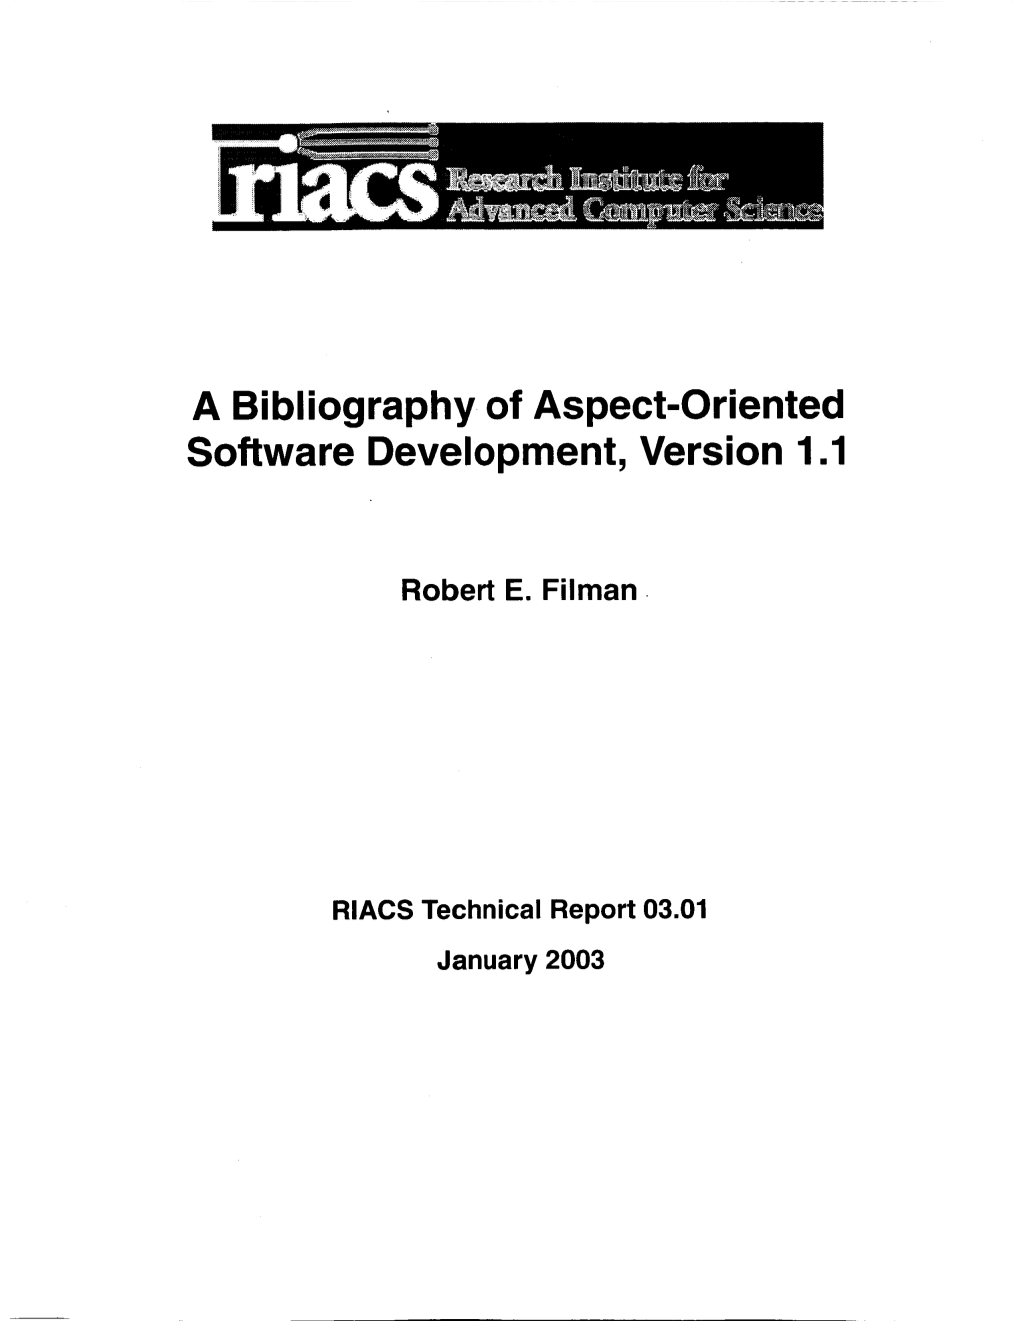 A Bibliography of Aspect-Oriented Software Development, Version 1 .I